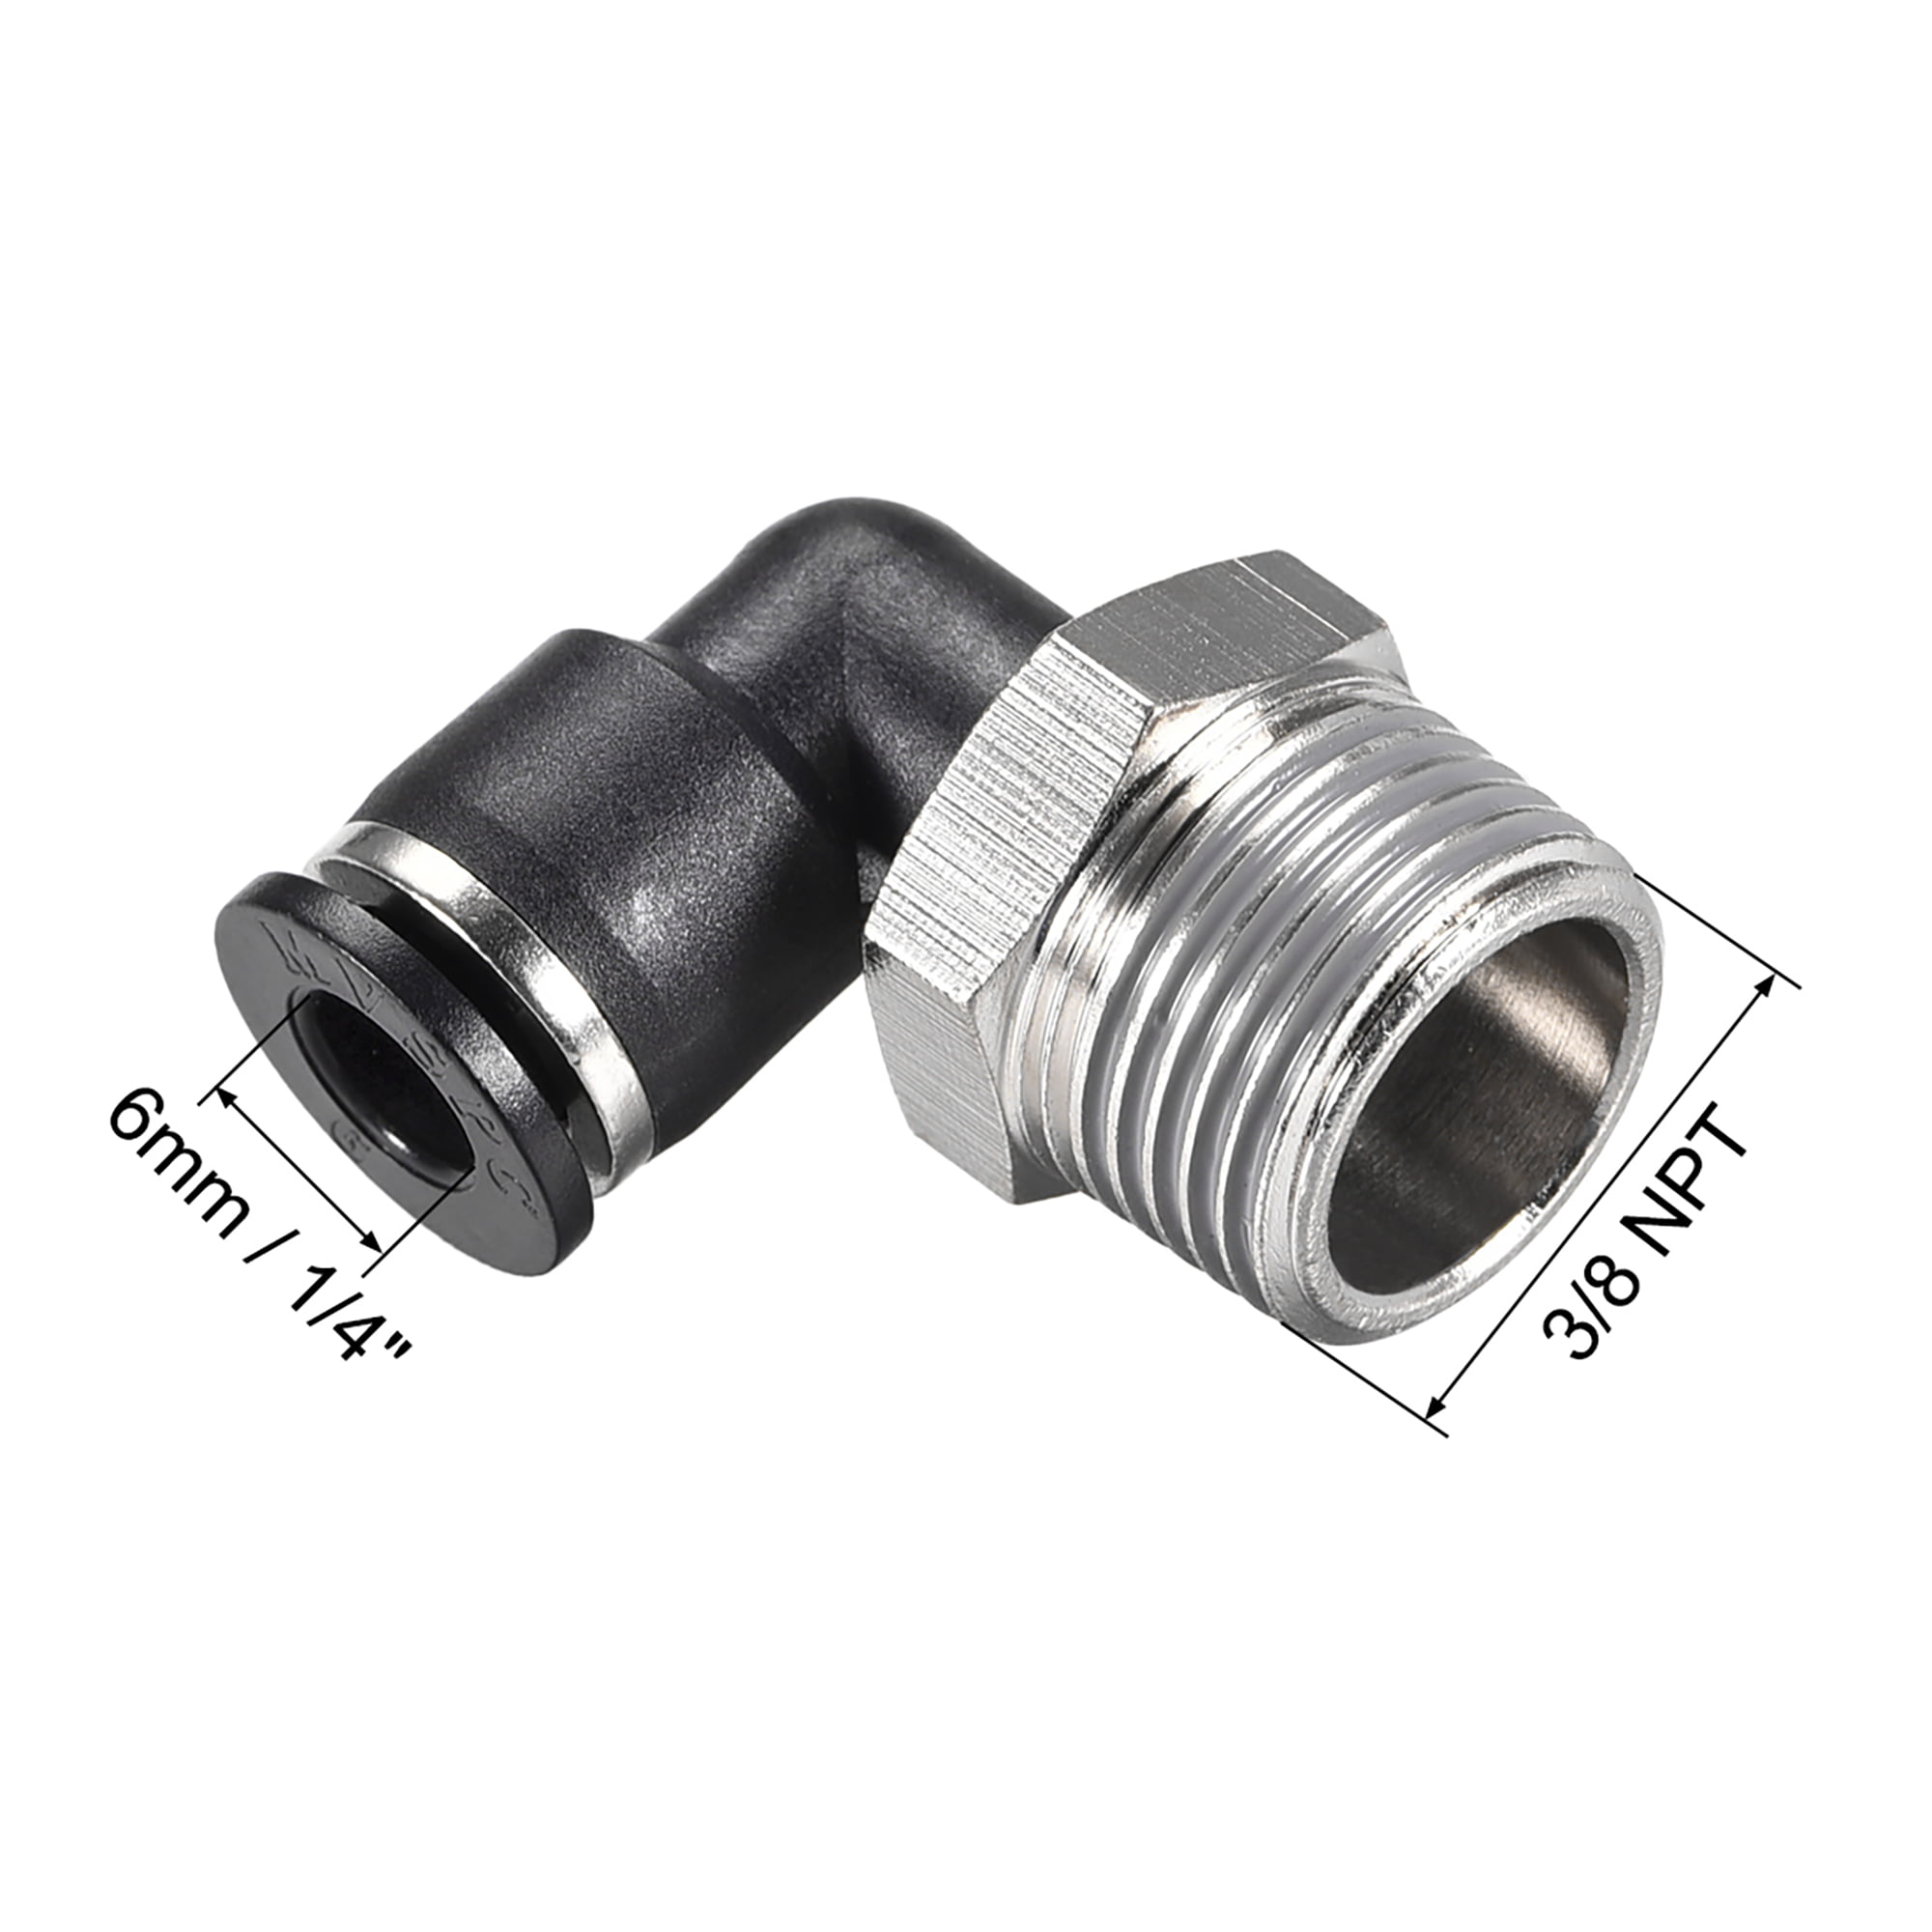 3pcs Pneumatic 1/2" OD X 3/8" NPT Male Thread Elbow Connector Push In Fitting 